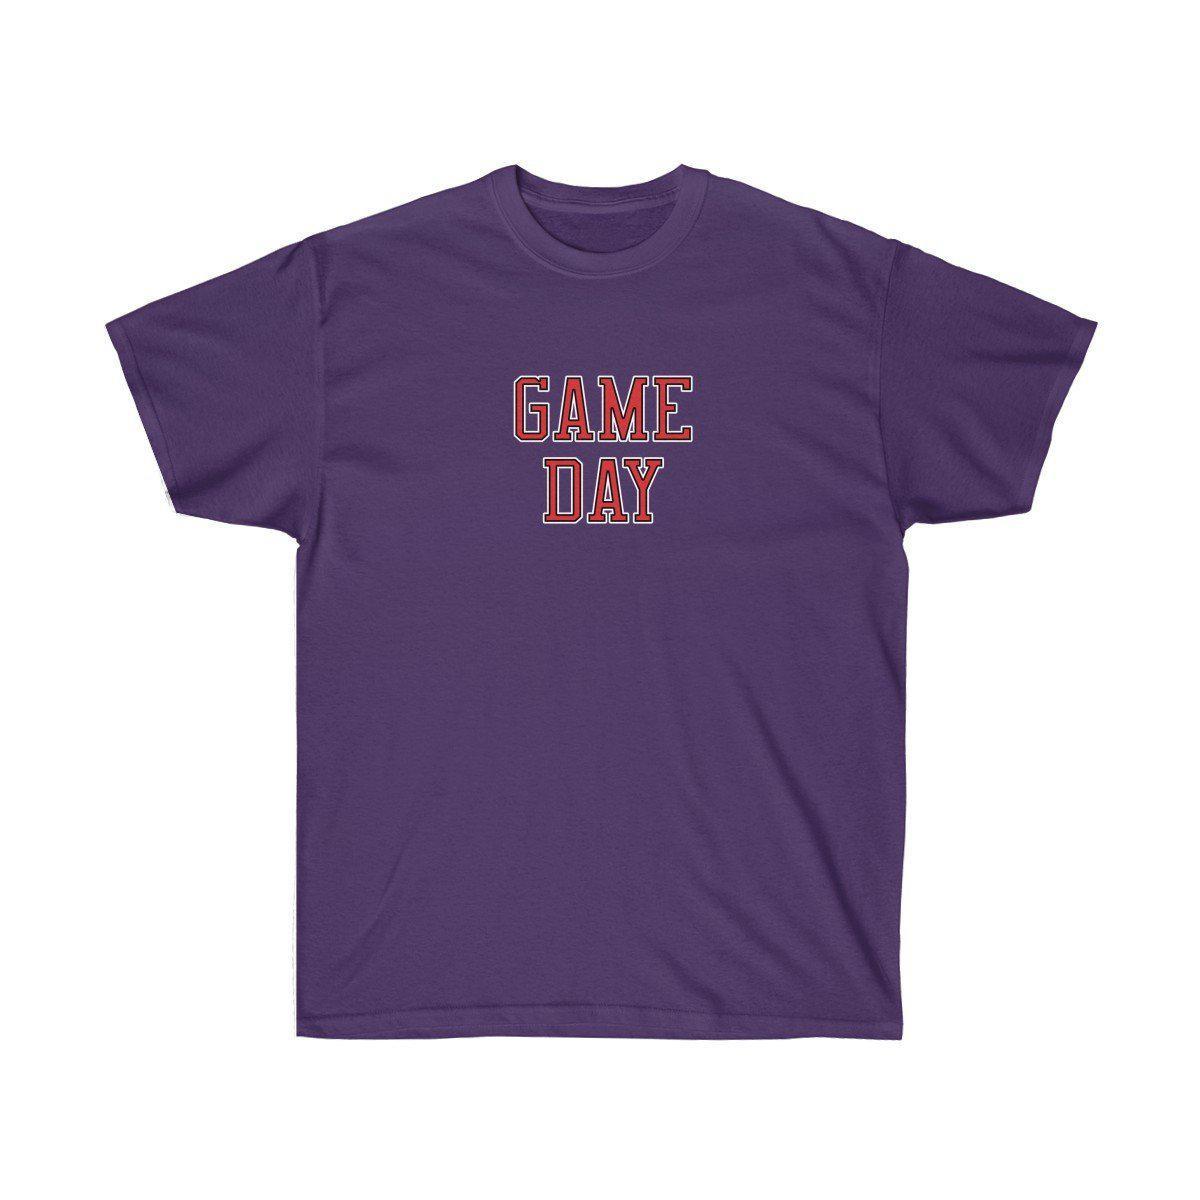 Game Day Tee - Sports T-shirt for Football, Basket, Soccer games-Purple-S-Archethype